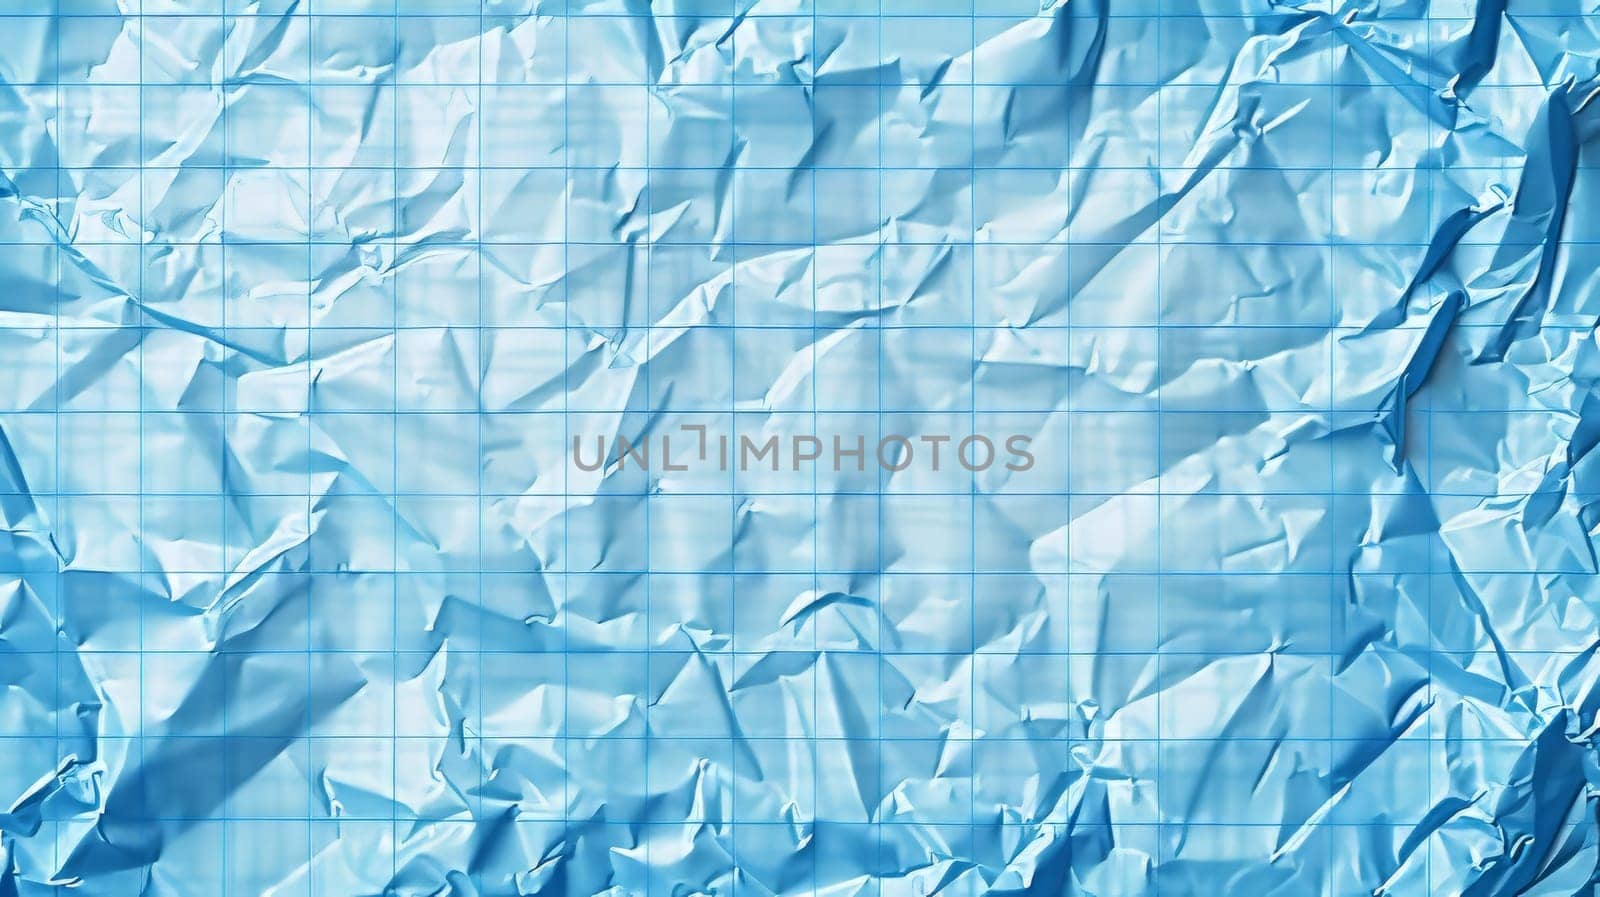 Paper texture with crumples and folds of blue checked paper, modern illustration. White blank notebook page with grid, wrinkle and fold effect, mock up, educational template.